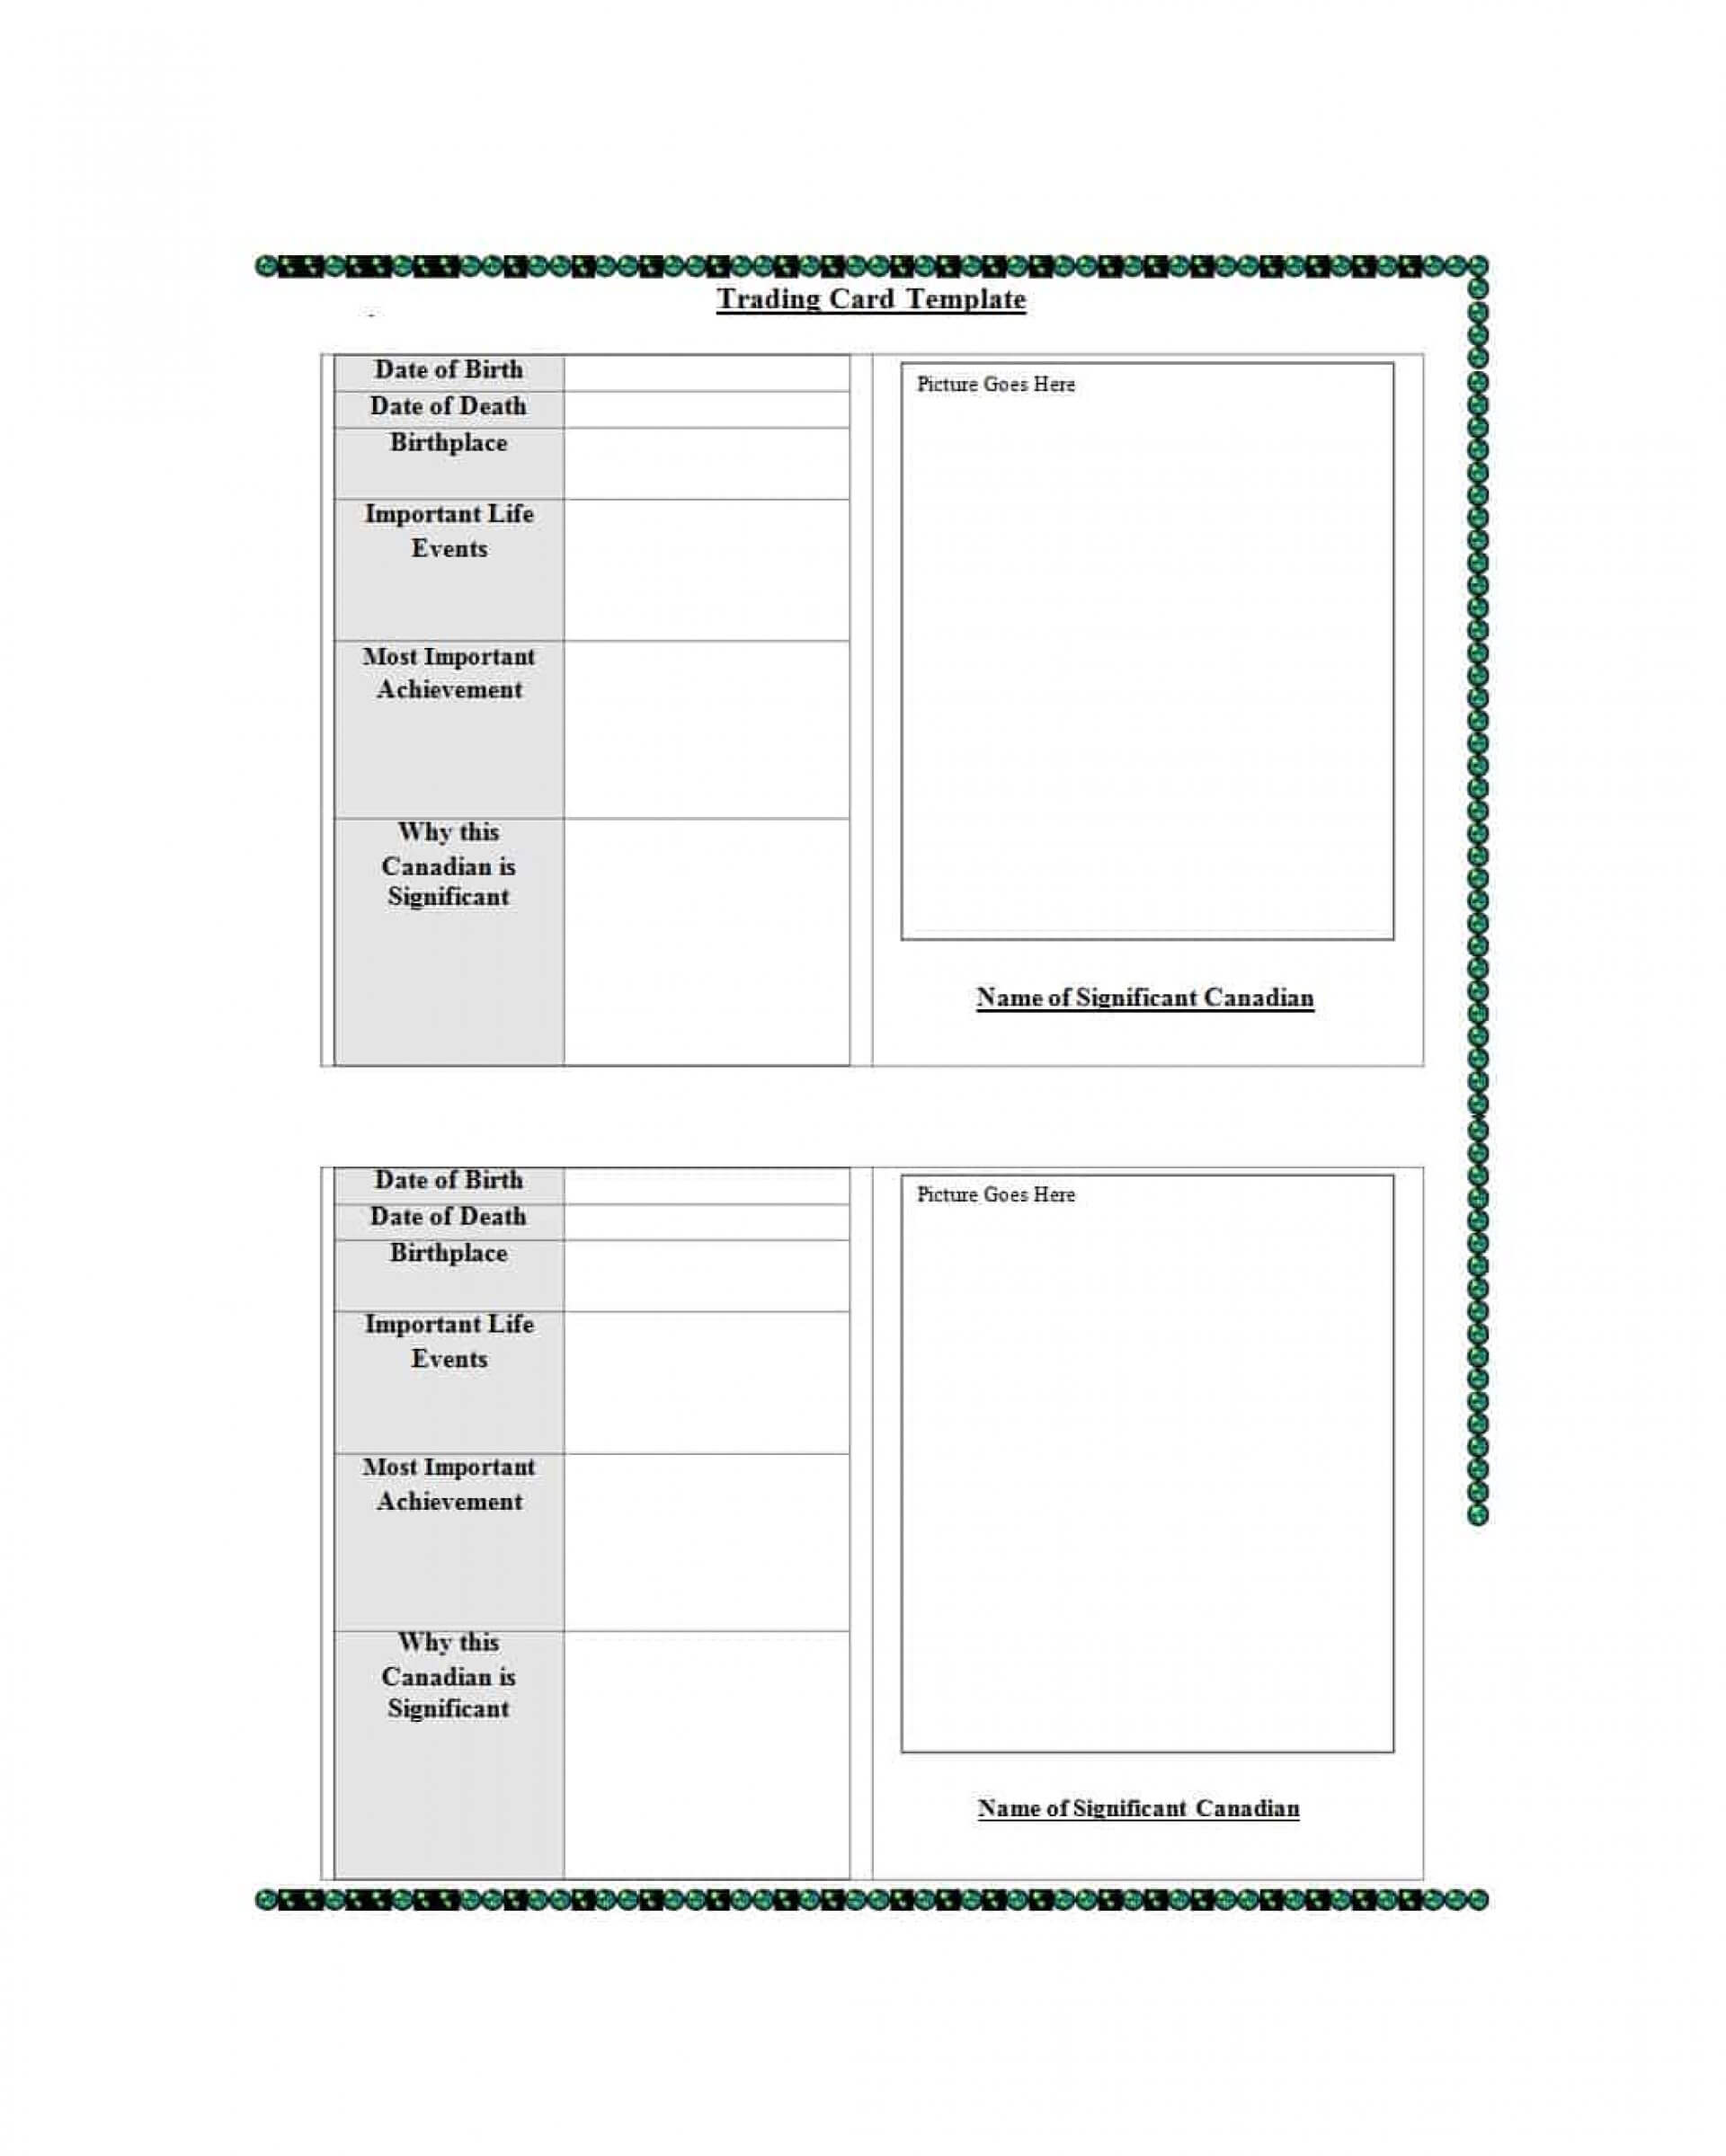 024 Baseball Trading Card Template Free Download Ideas Throughout Trading Cards Templates Free Download